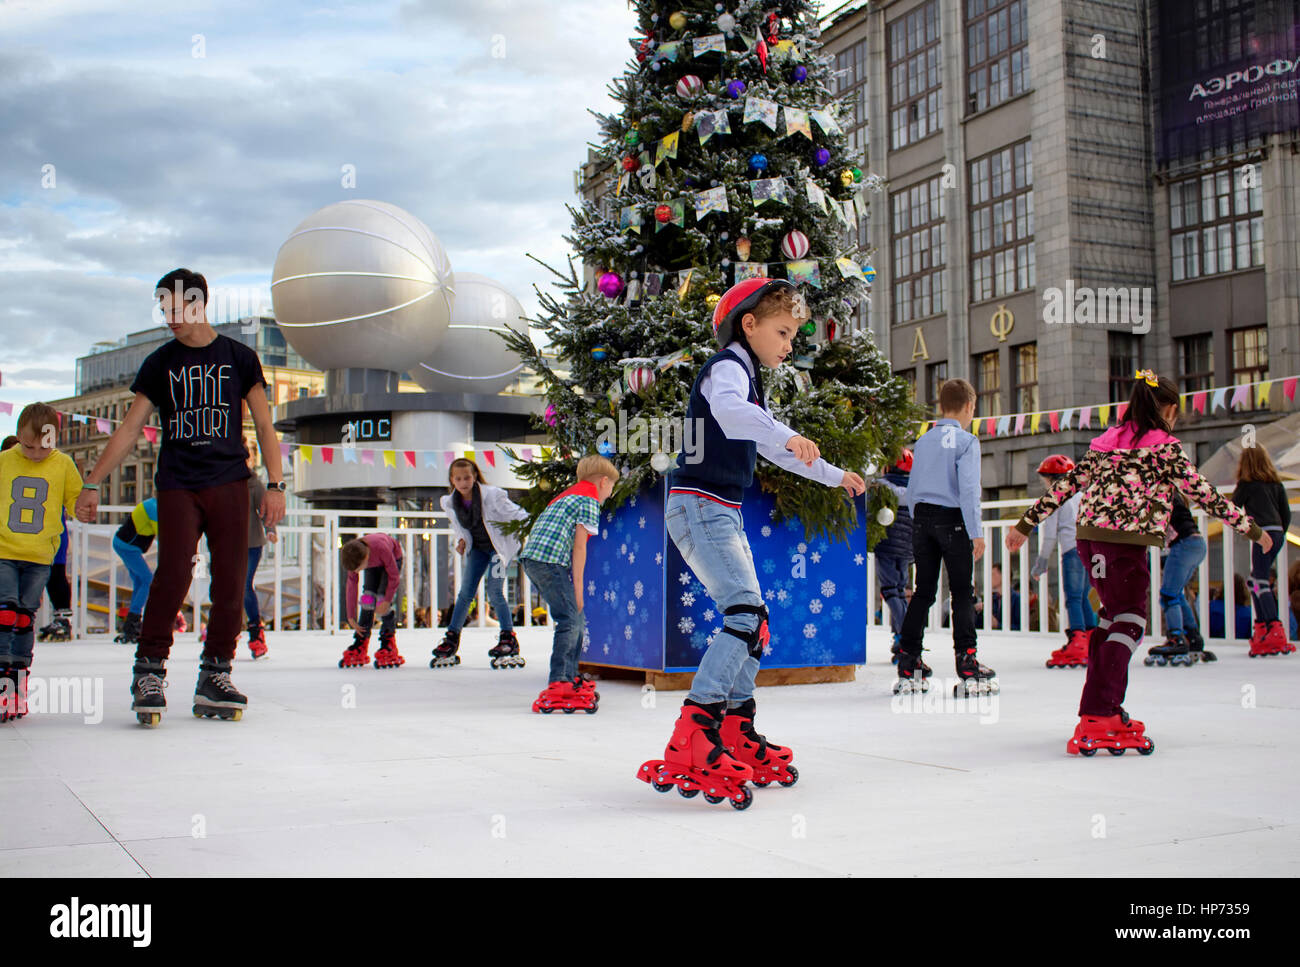 Children skate at Moscow City Day Celebrations and Festival on Tverskaya street. Christmas tree is in the middle. Over a thousand events citywide are  Stock Photo